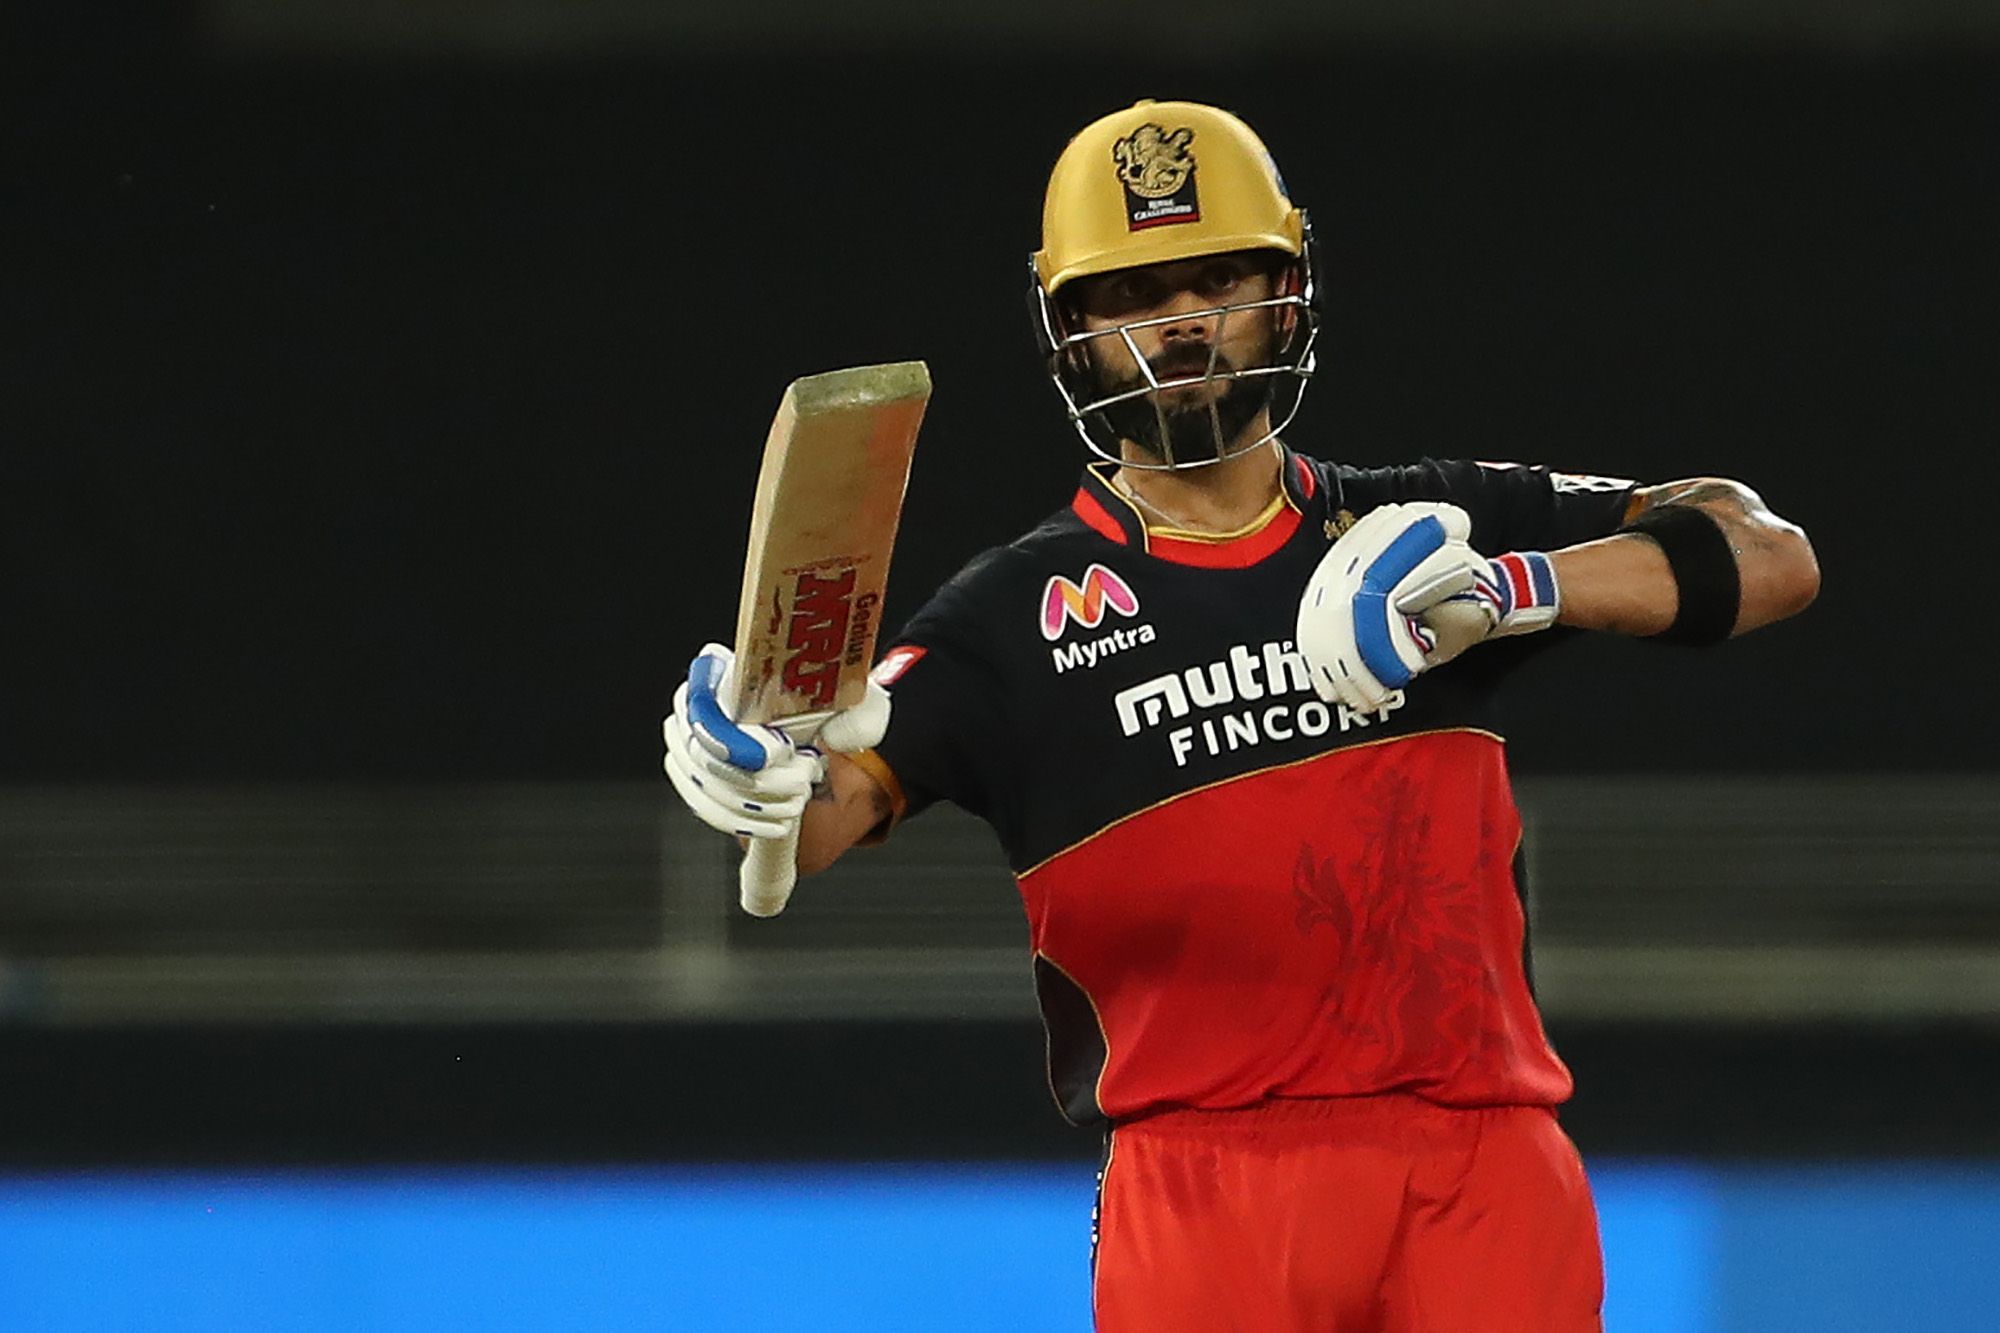 RCB vs SRH: Three bets which can fetch you big bucks from Royal Challengers Bangalore vs Sunrisers Hyderabad IPL 2021 fixture